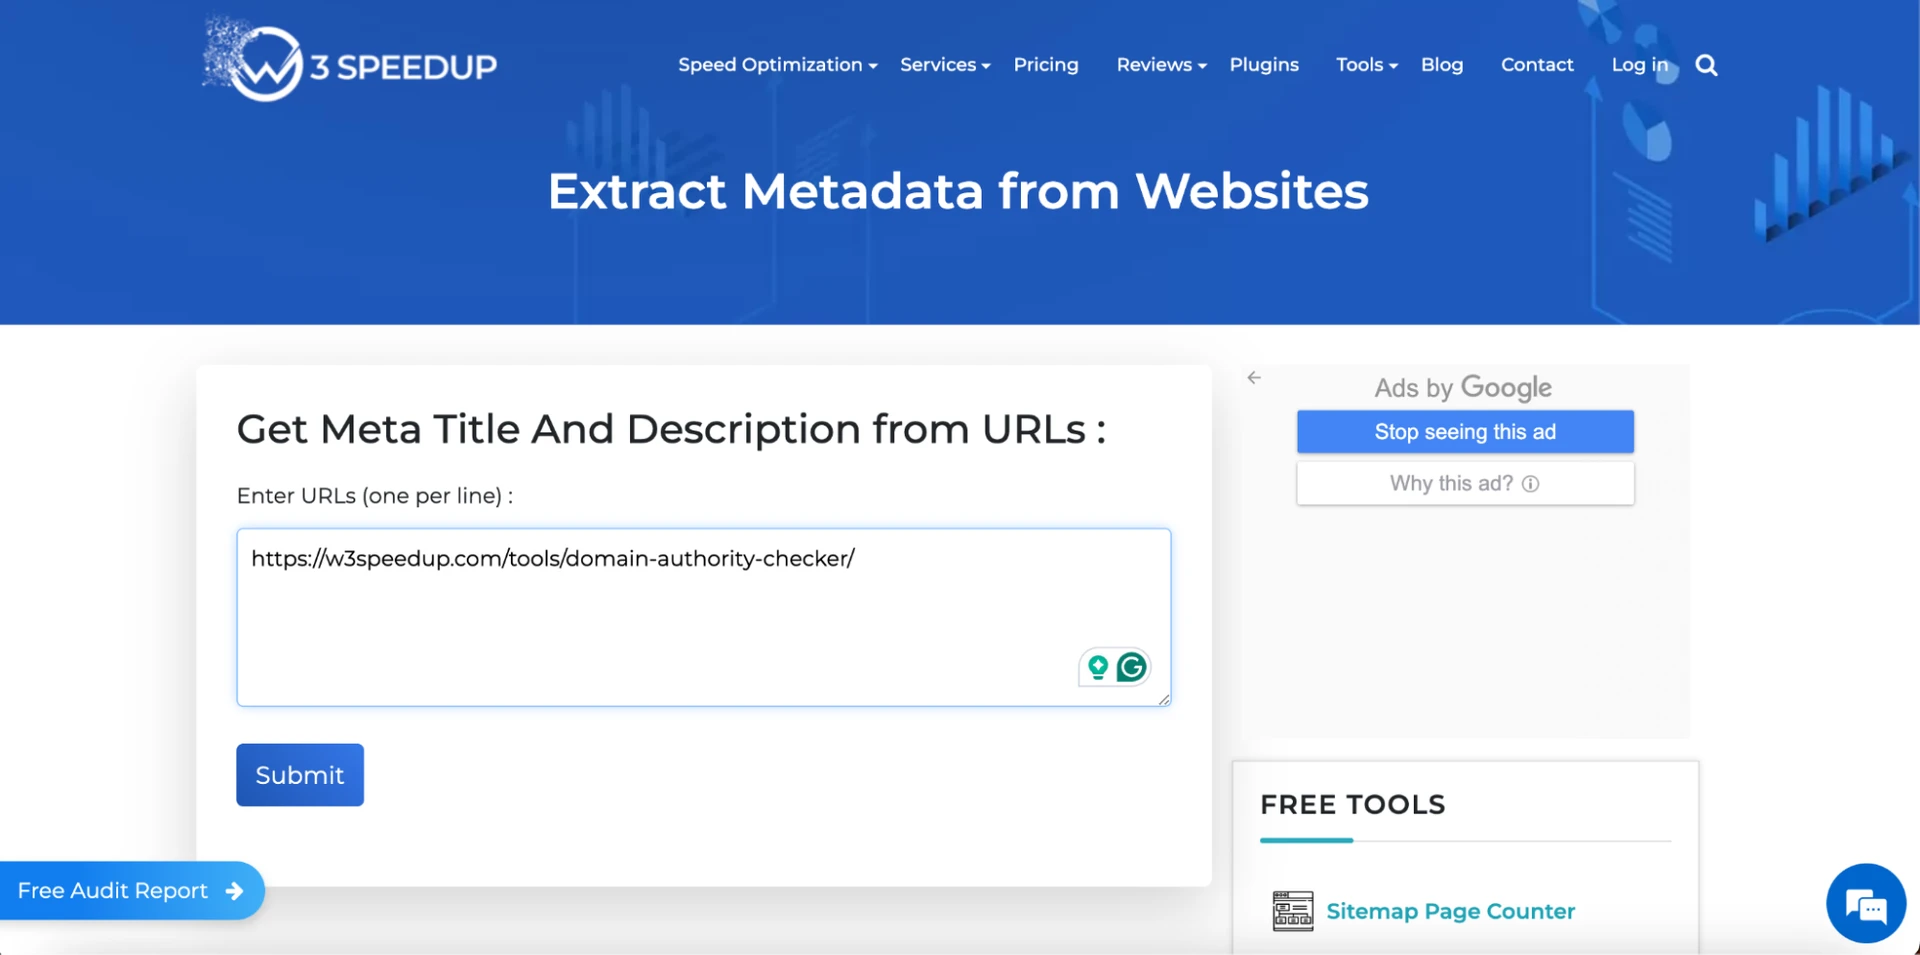 Extract the Meta Title and Meta Description with the W3 SpeedUp Meta Tag Extractor tool - Extract Metadata from Websites